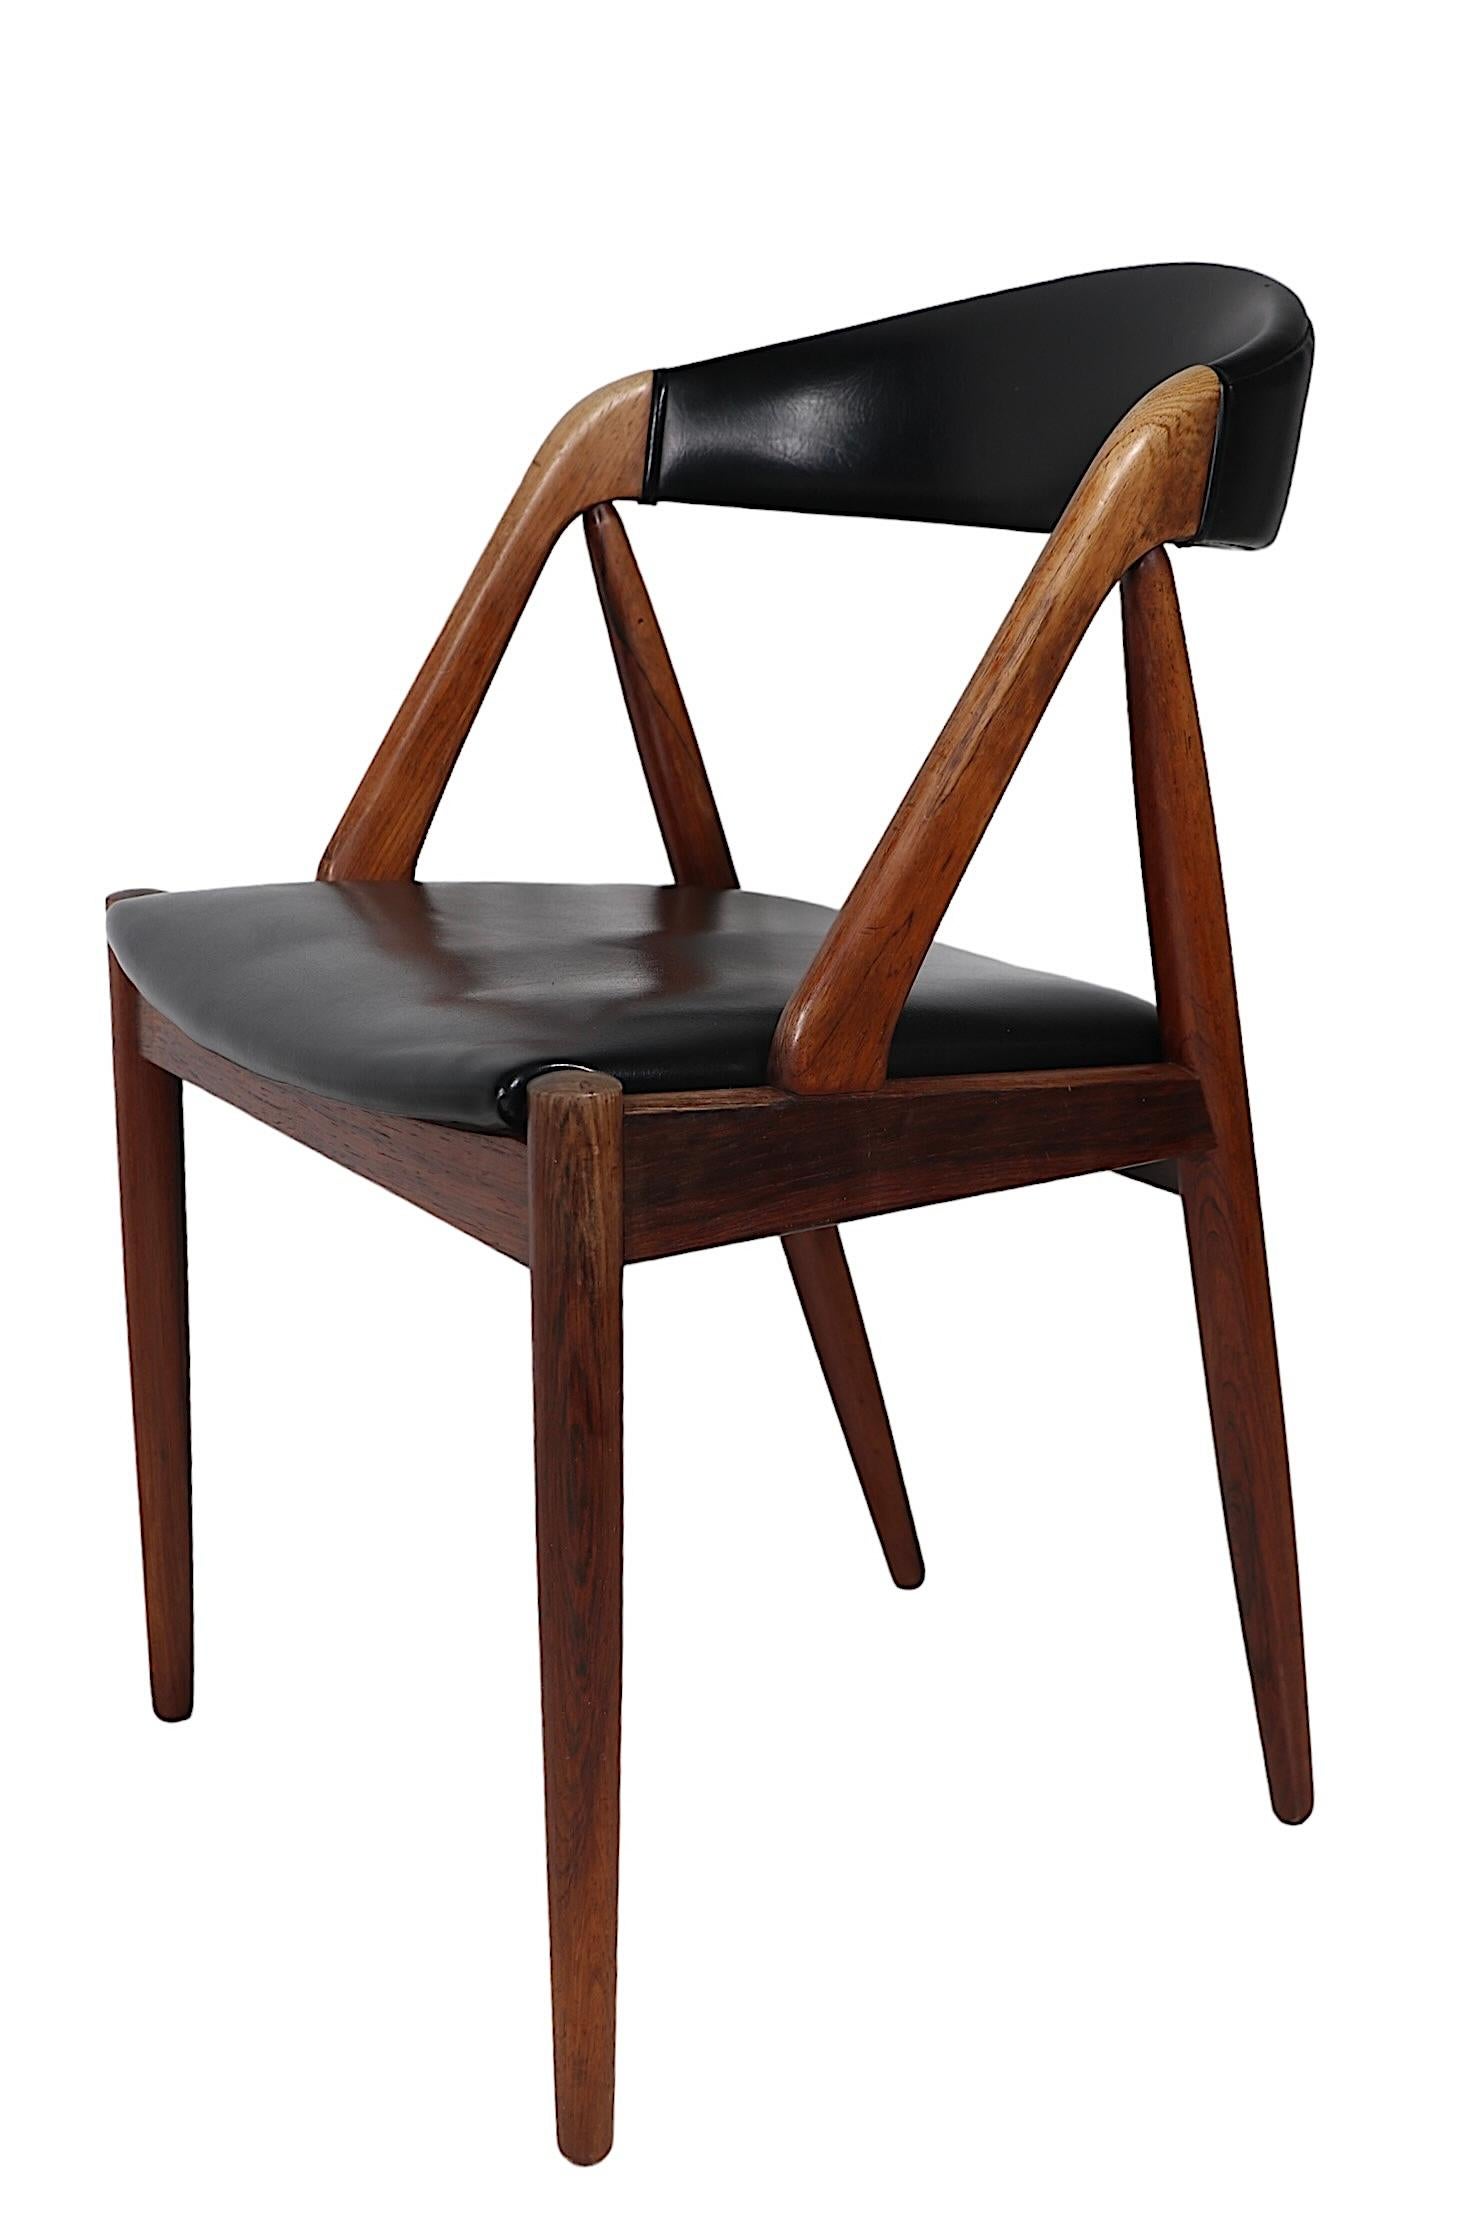 Iconic Danish Mid Century Modern dining chairs designed by Kai Kristiansen, made in Denmark by Shou Andersen Mobelfabrik, circa 1960's. The chairs feature  sculptural, architectural frames of solid rosewood, with graphic black vinyl seats and backs.